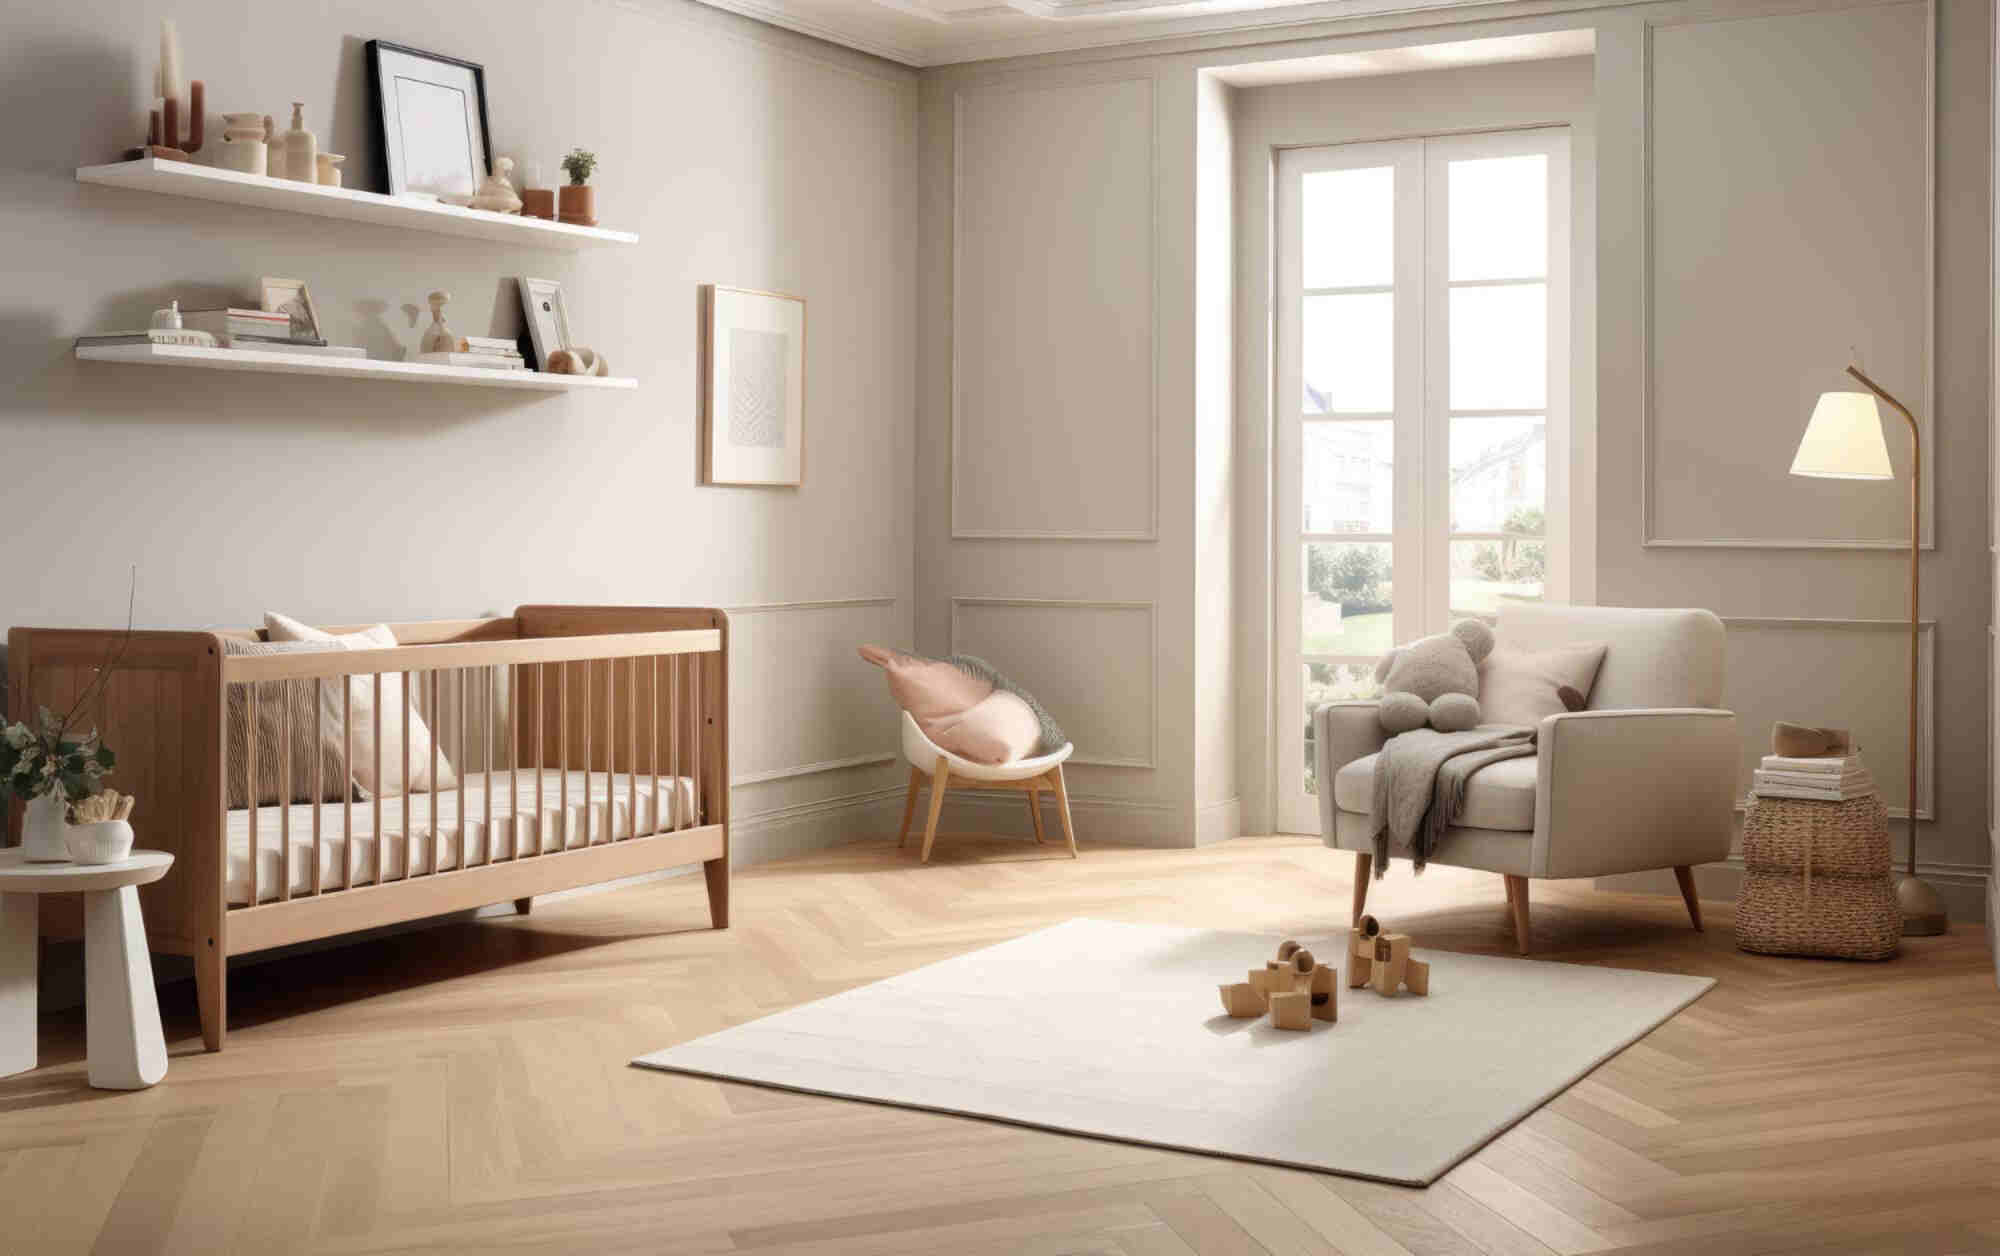 Everything You Need to Know About Babyproofing 